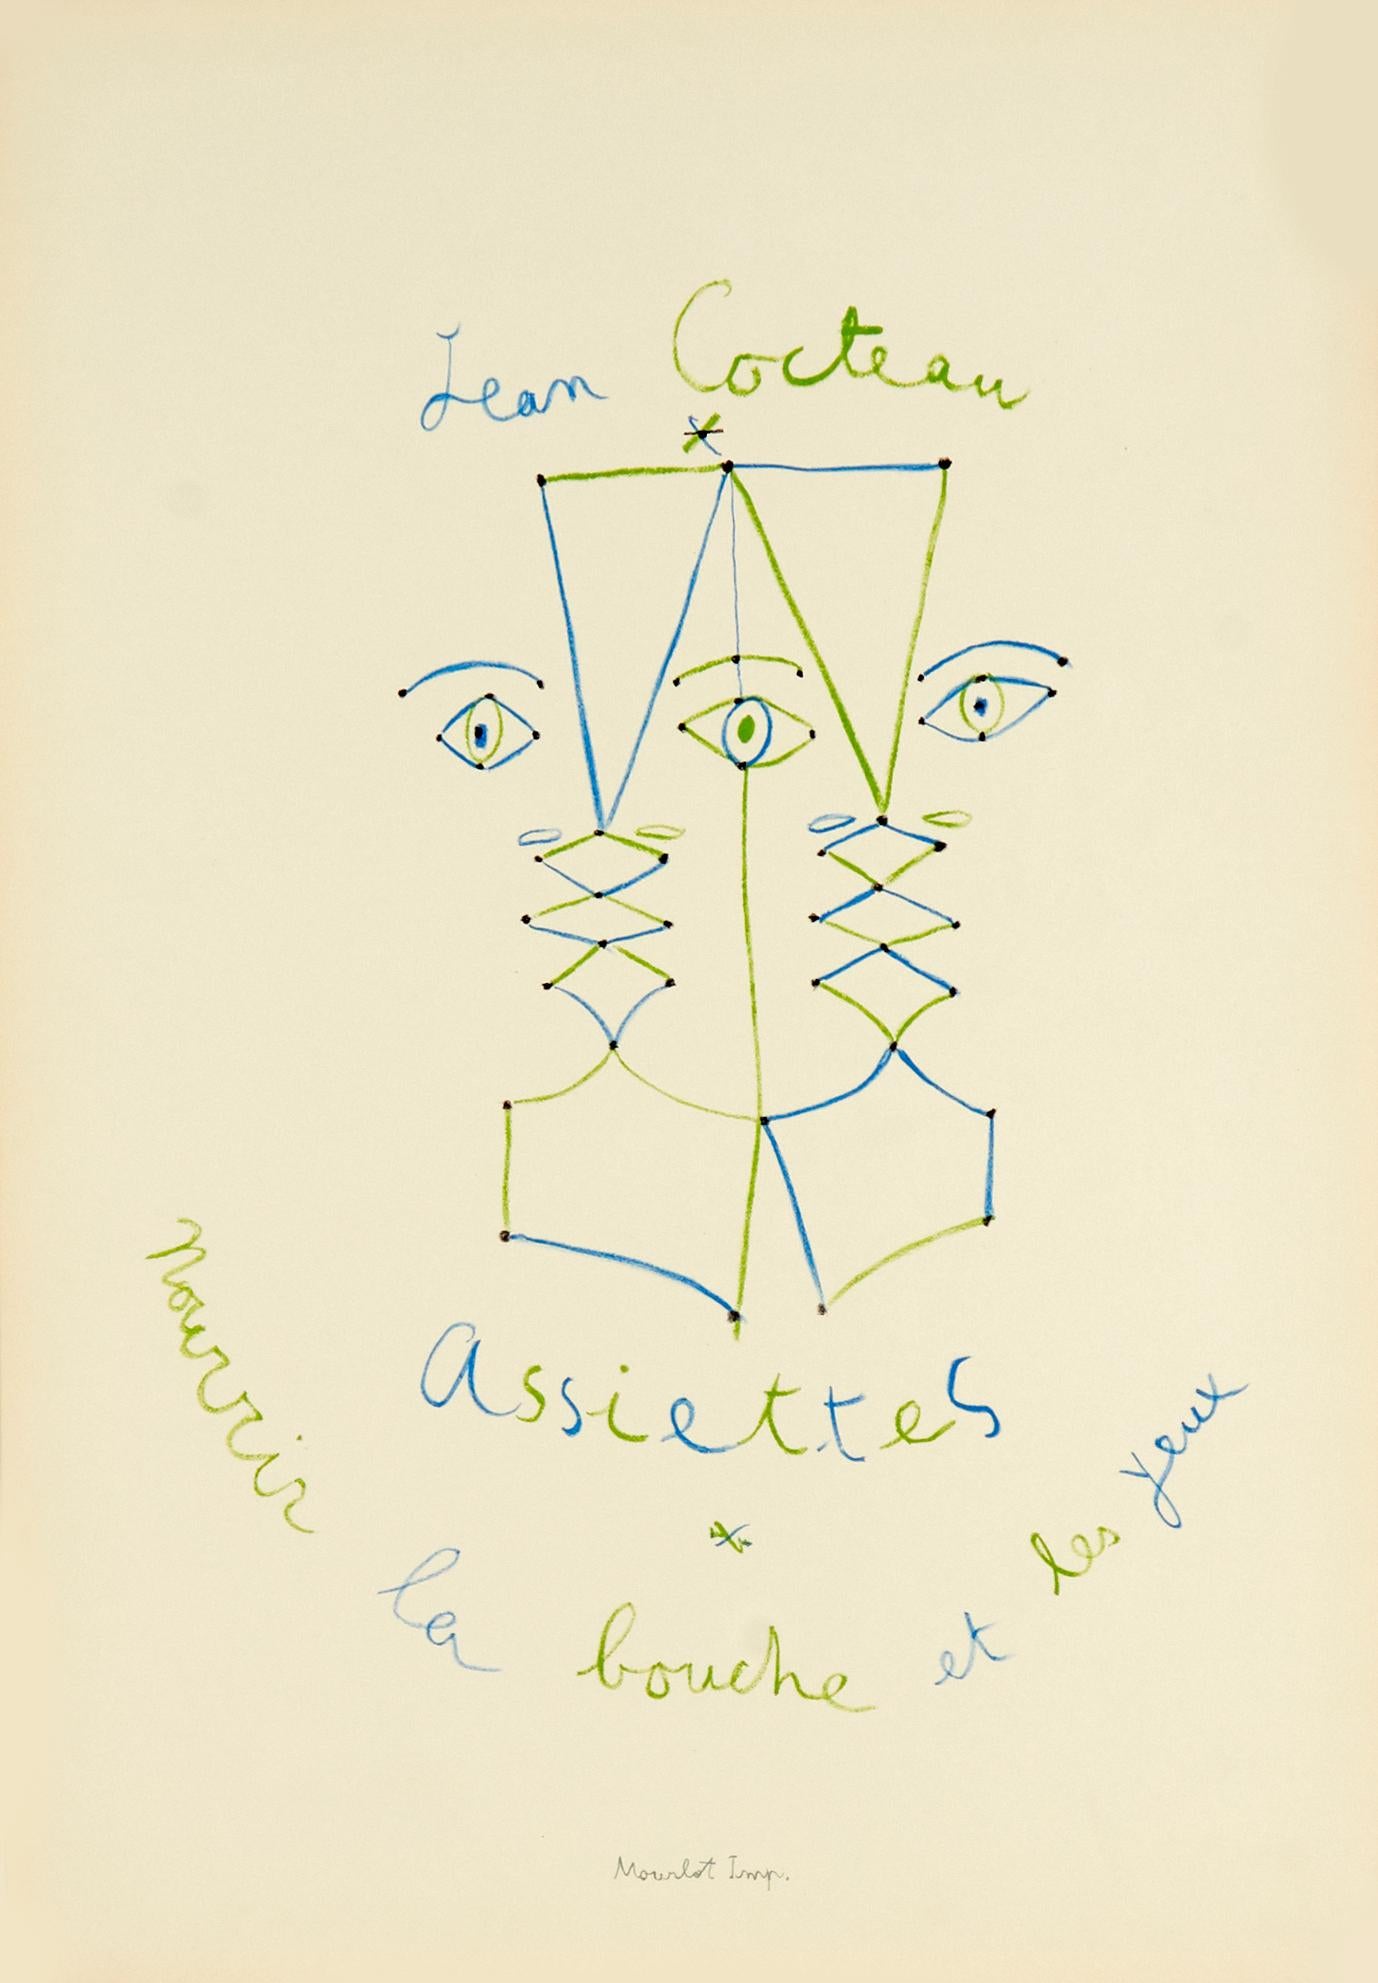 This lithograph was printed at the Atelier Mourlot in 1955 on Arches paper. The title reads in English  'Jean Cocteau Plates - feed both your eyes and your mouth'. Cocteau famously worked at the Workshop Jolly experimenting with ceramics, to which